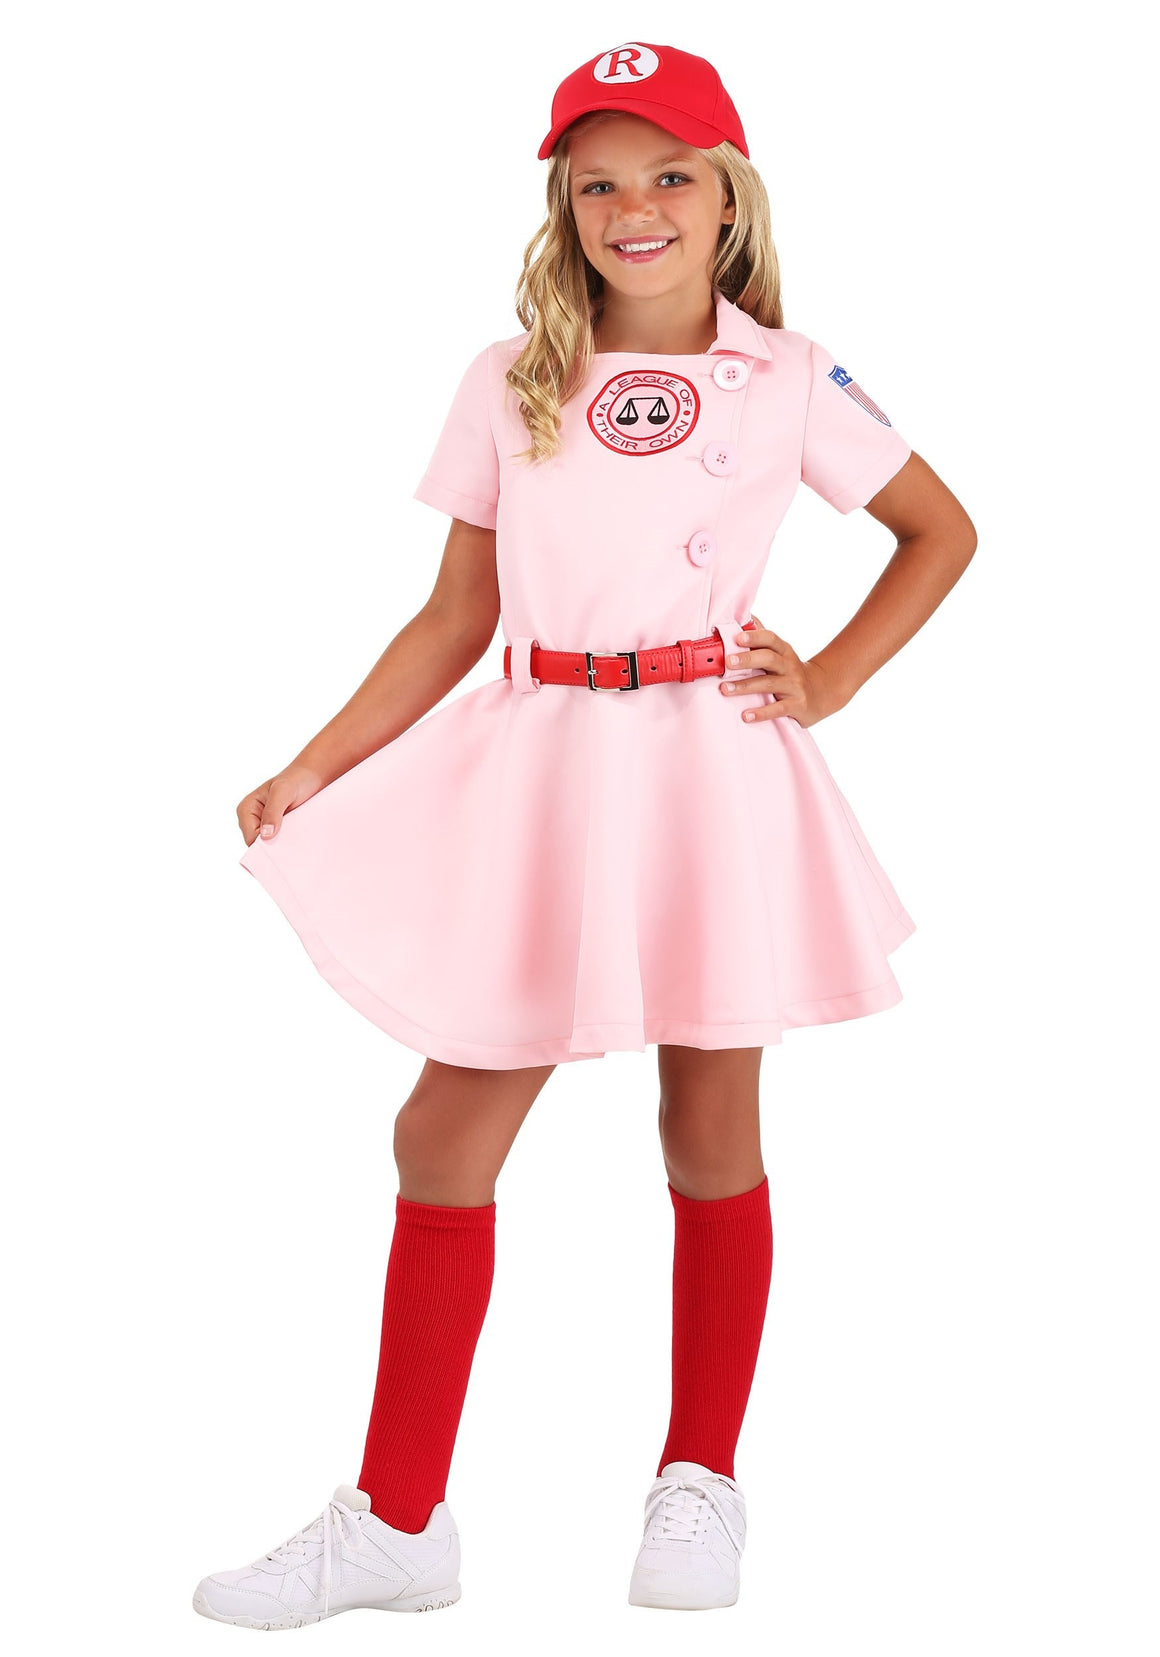 A League of Their Own Halloween Costumes – Kids Halloween Costumes